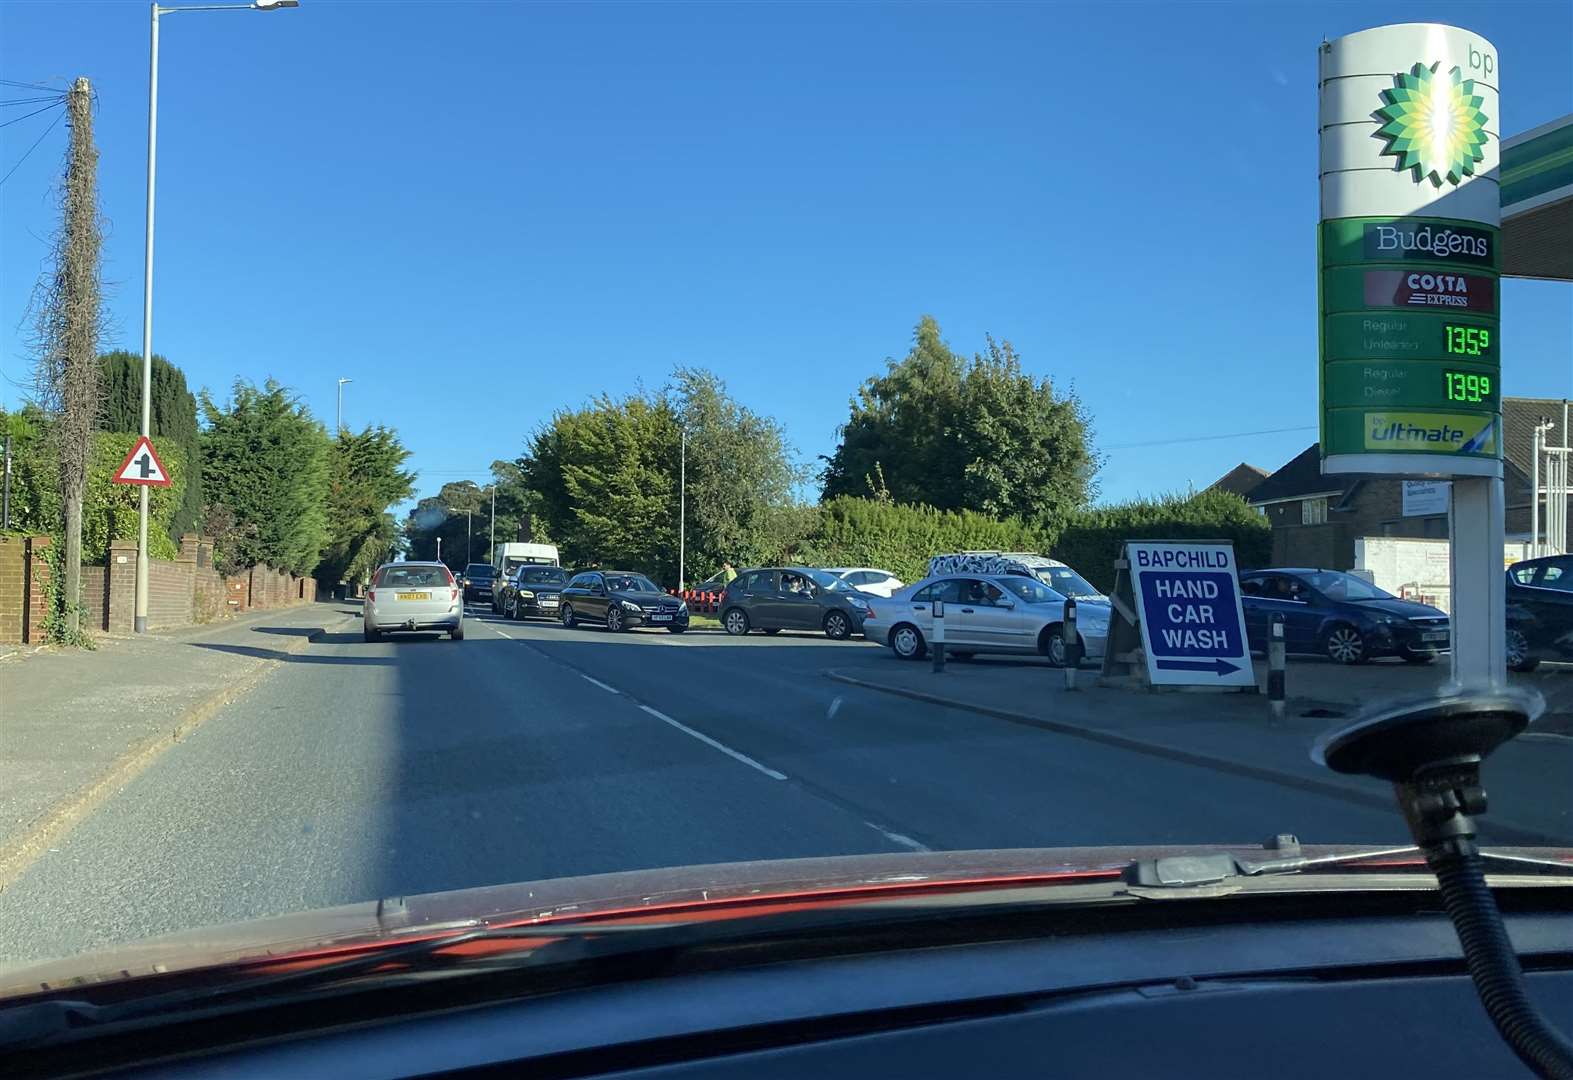 Traffic forming at the garage on the A2 in Bapchild, near Sittingbourne, causing long tailbacks into Teynham